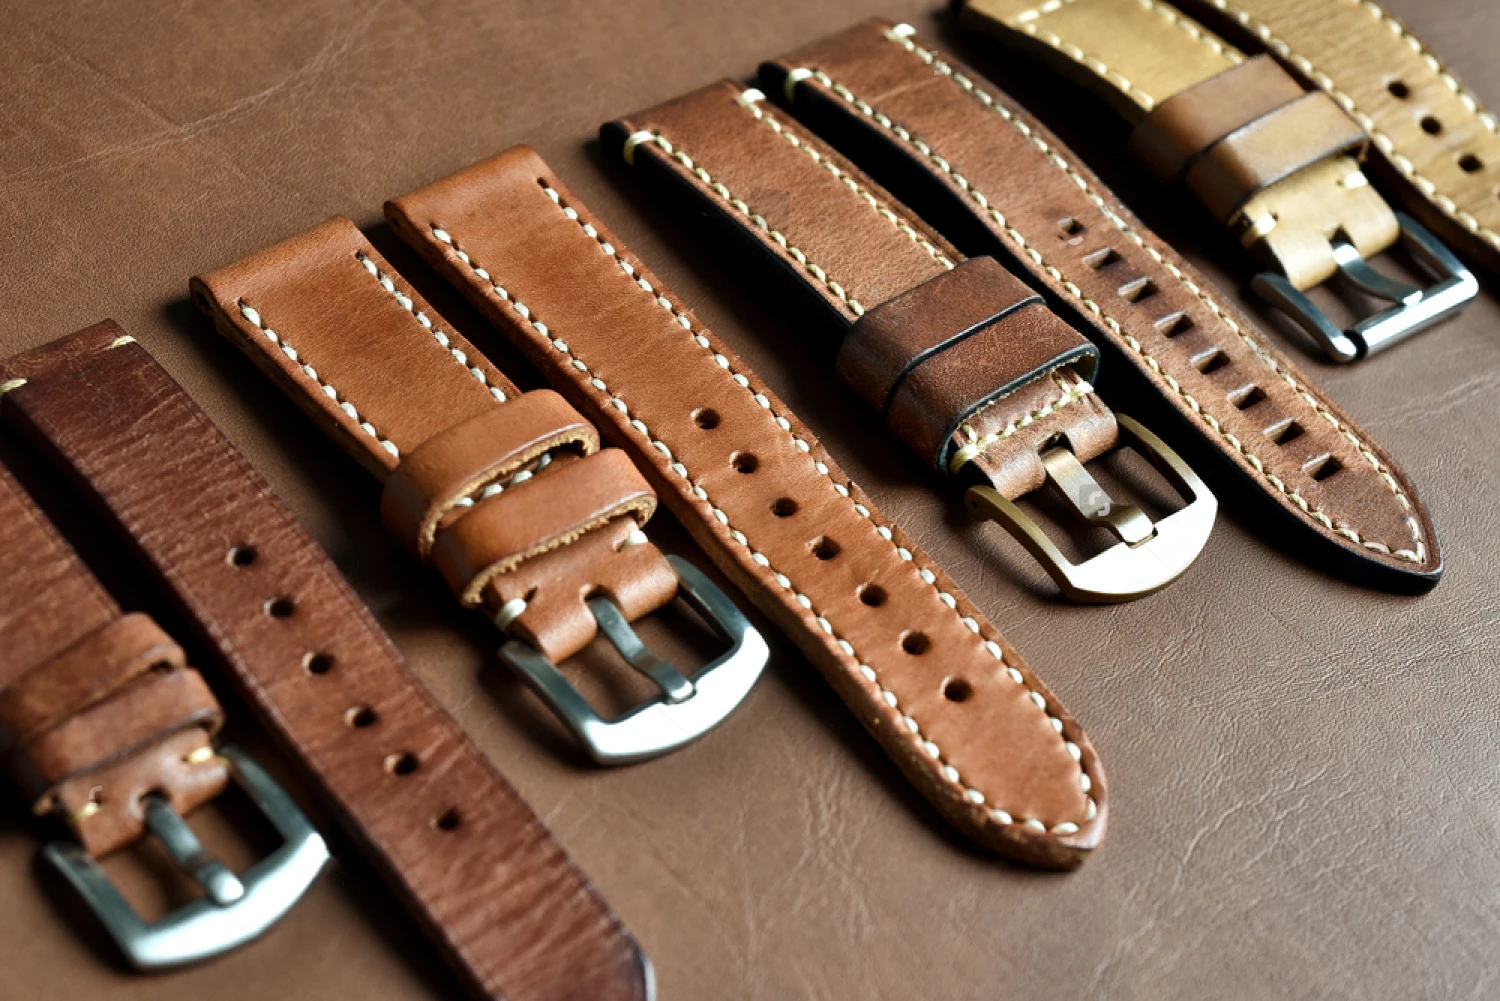 leather watch band strap compatible with all model straps h-a-m-i-l-t-o-n H691.785.100 belowzero/H695.704.104 khaki field belt enlarge